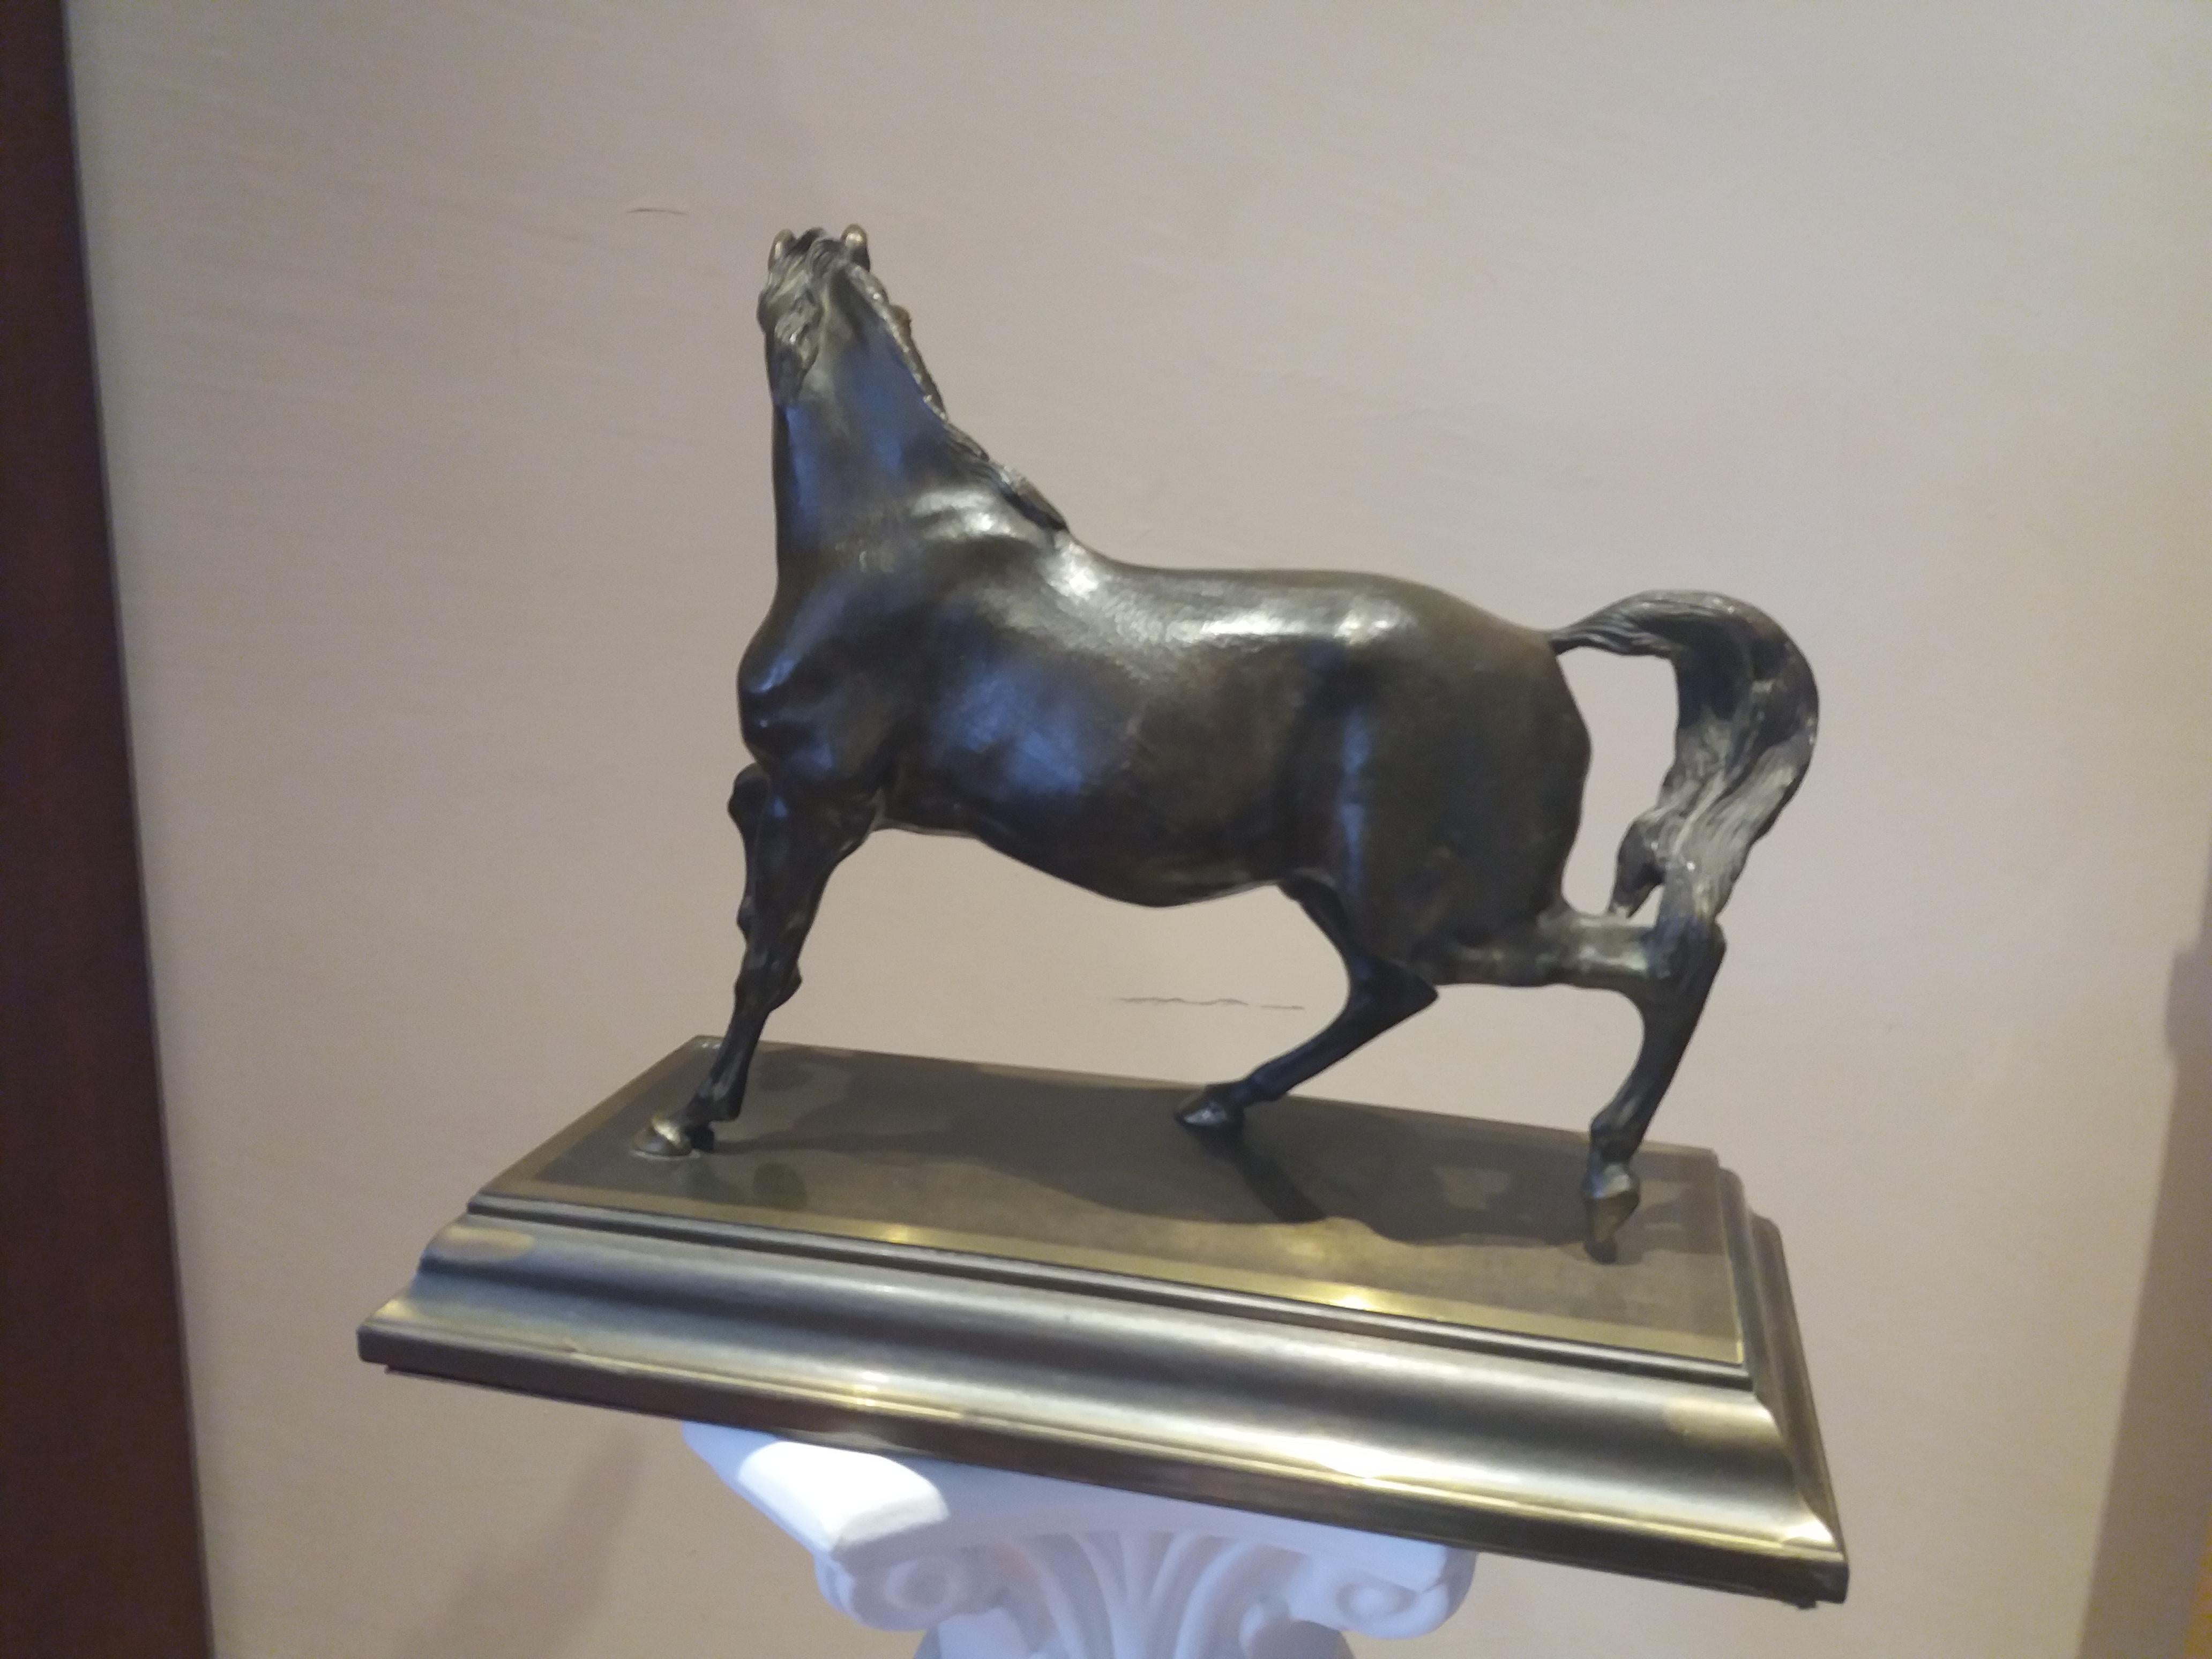 
horse. 19th century bronze sculpture

measurements with the base are 37.5 x 17.5 x 31 cm